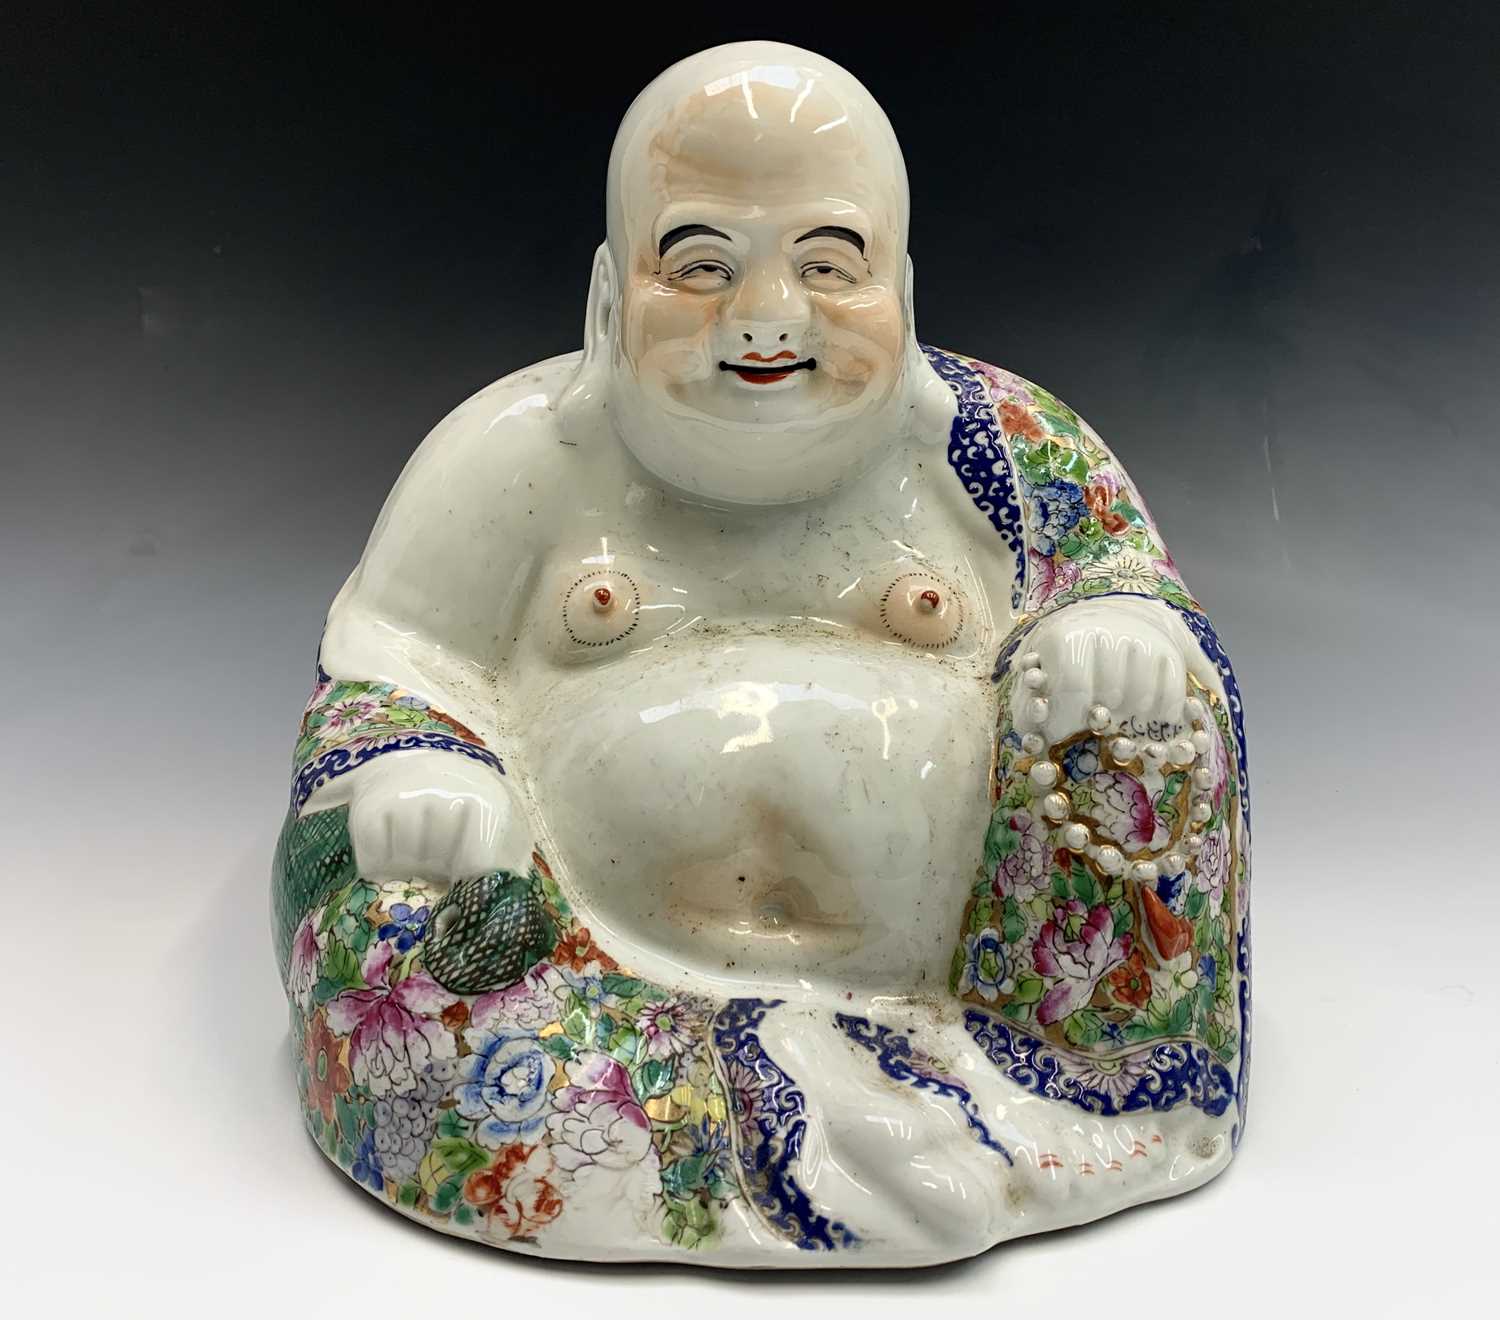 A large Chinese porcelain figure of a seated Buddah, 20th century, wearing a floral decorated robe - Image 4 of 15